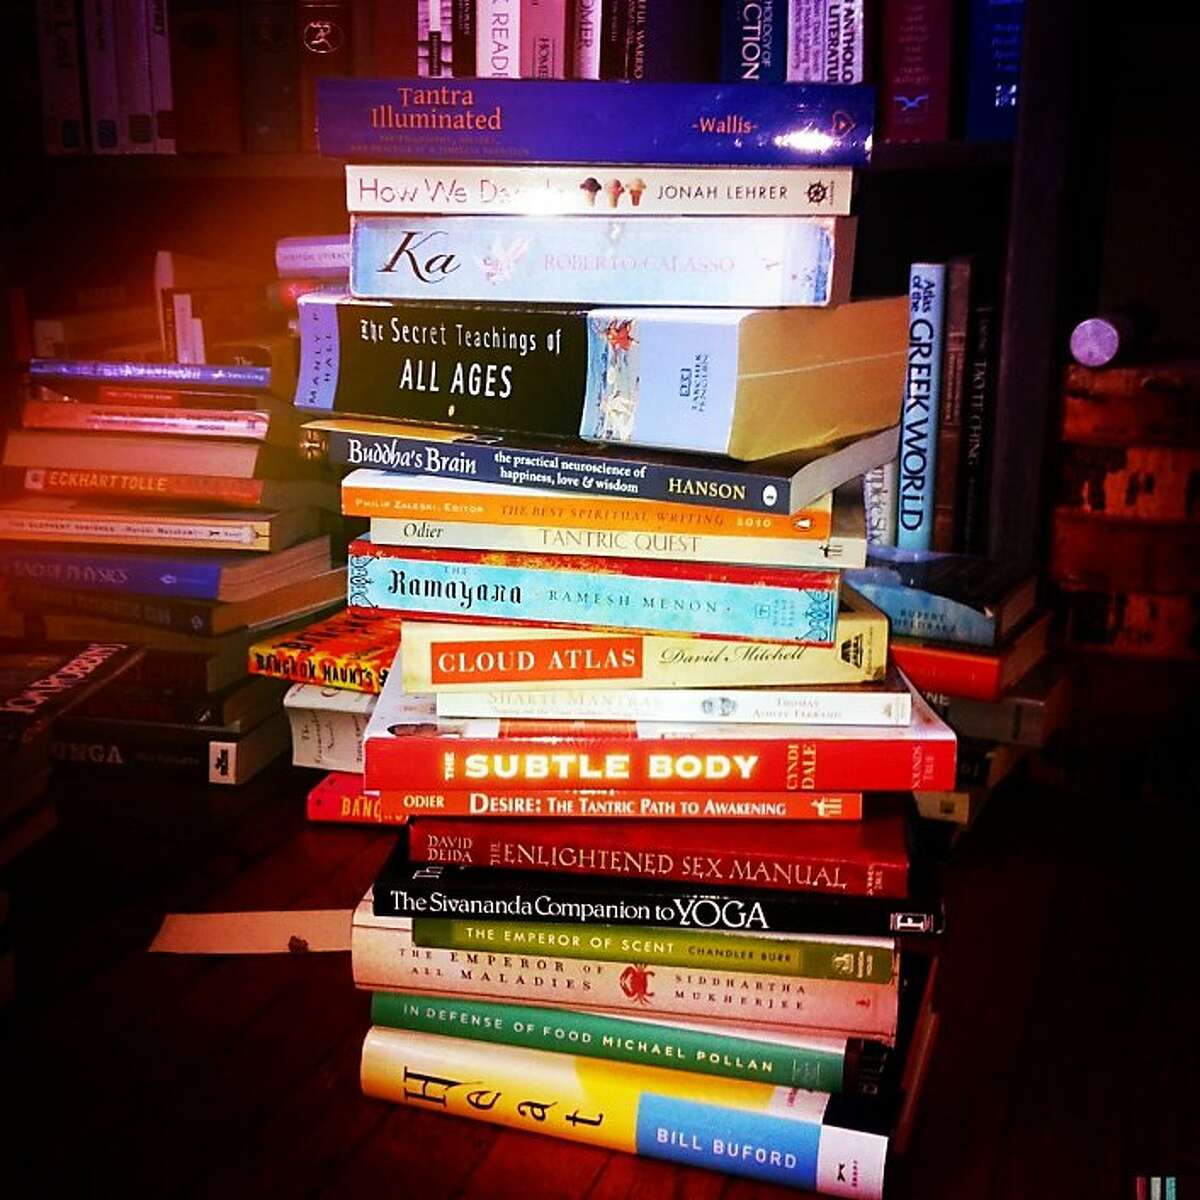 A wayward and wonderful summer reading list, 2012 style, hopefully not too neglected